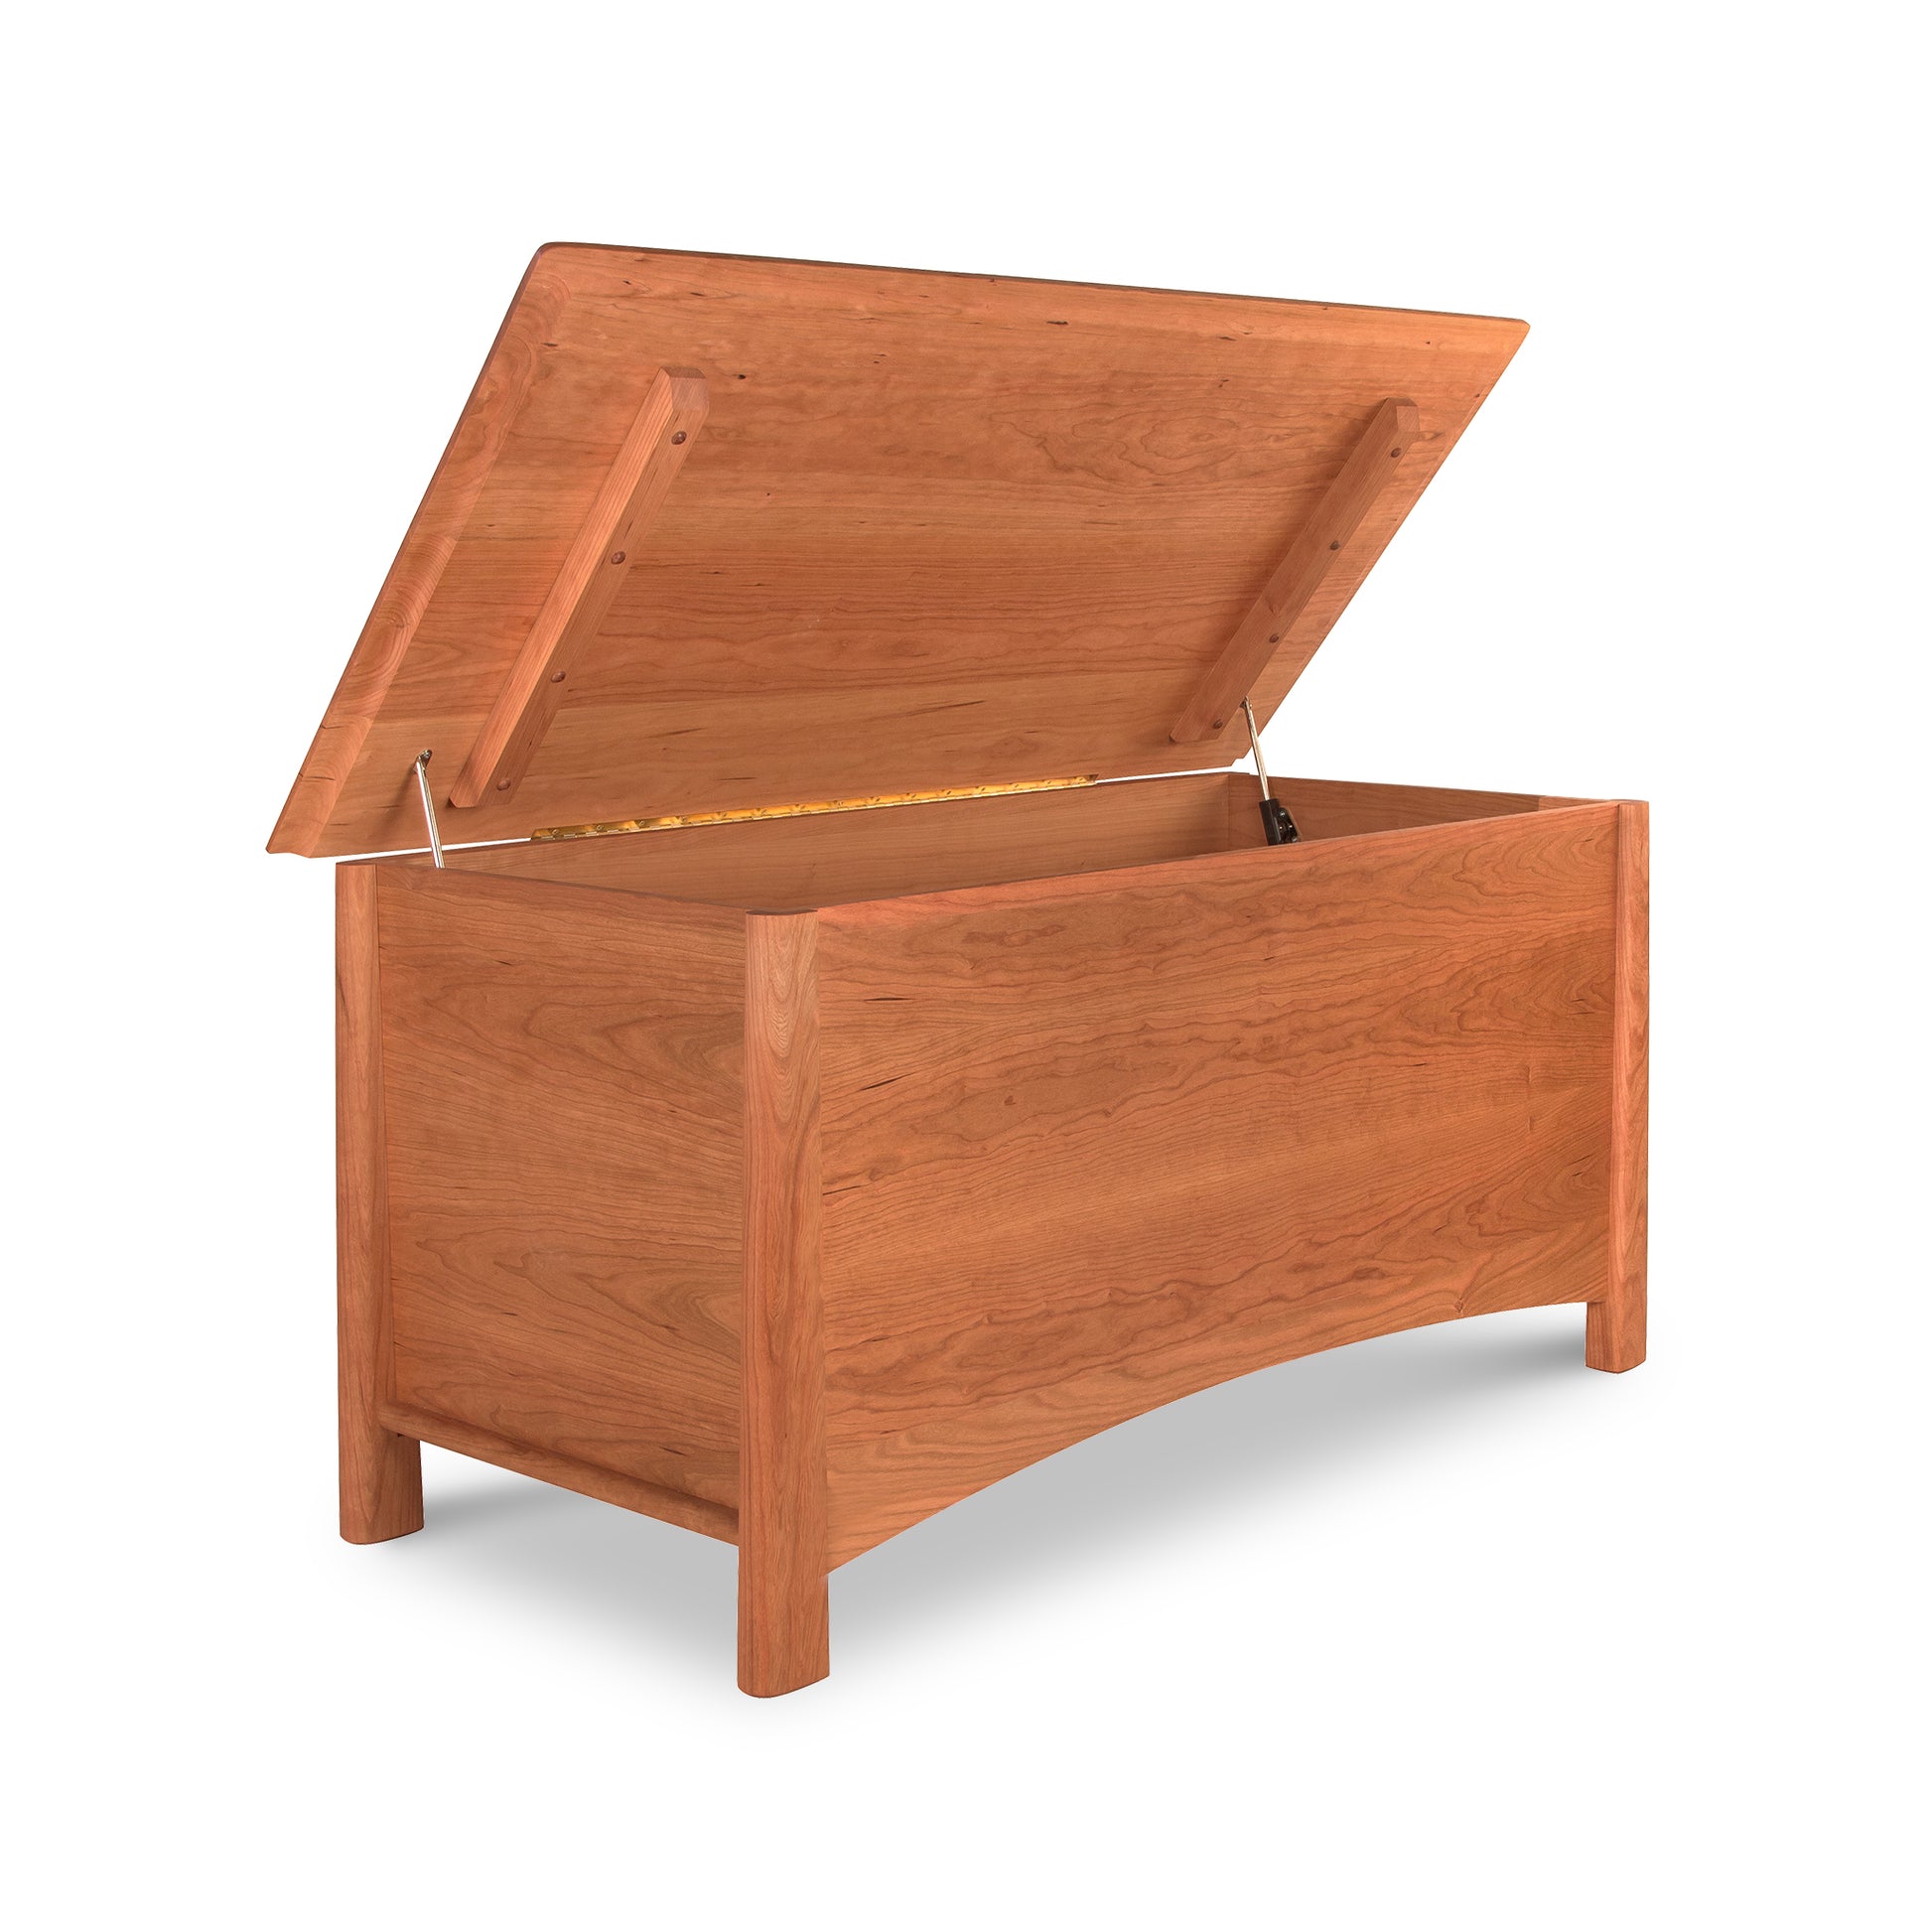 A Maple Corner Woodworks Cherry Moon Blanket Chest, crafted with solid wood storage and Vermont craftsmanship, with an open lid, isolated on a white background.